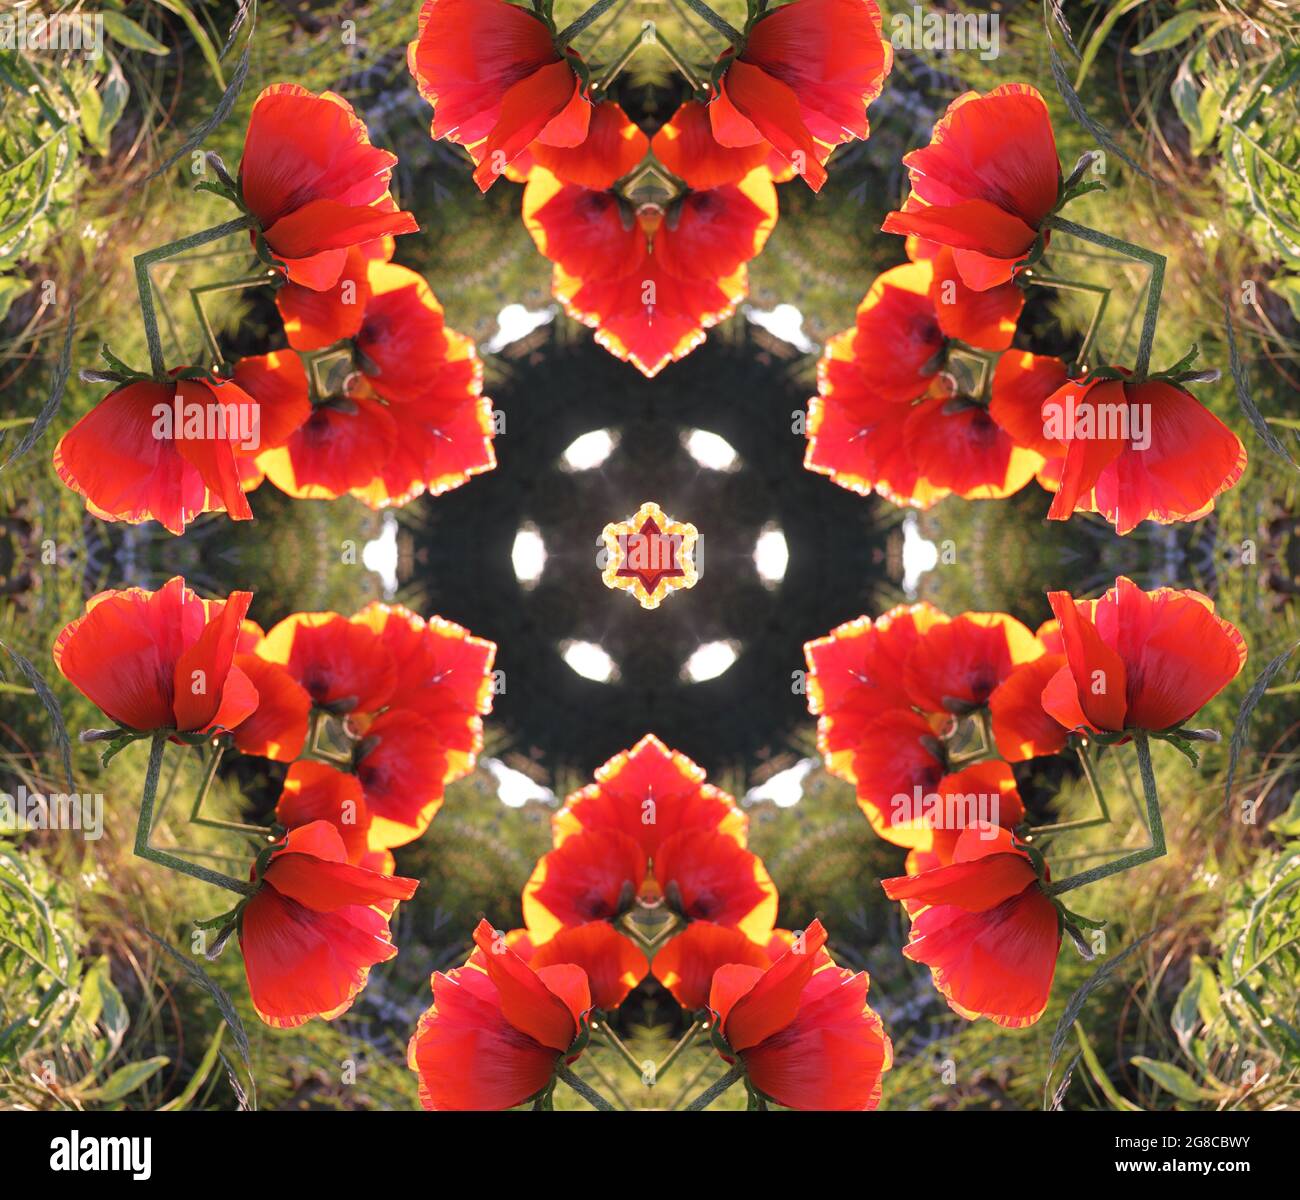 Kaleidoscope of energy, light and red flowers. Seasons, light, summer and   retro patterns. Poppy abstract backgrounds and wallpaper. Stock Photo